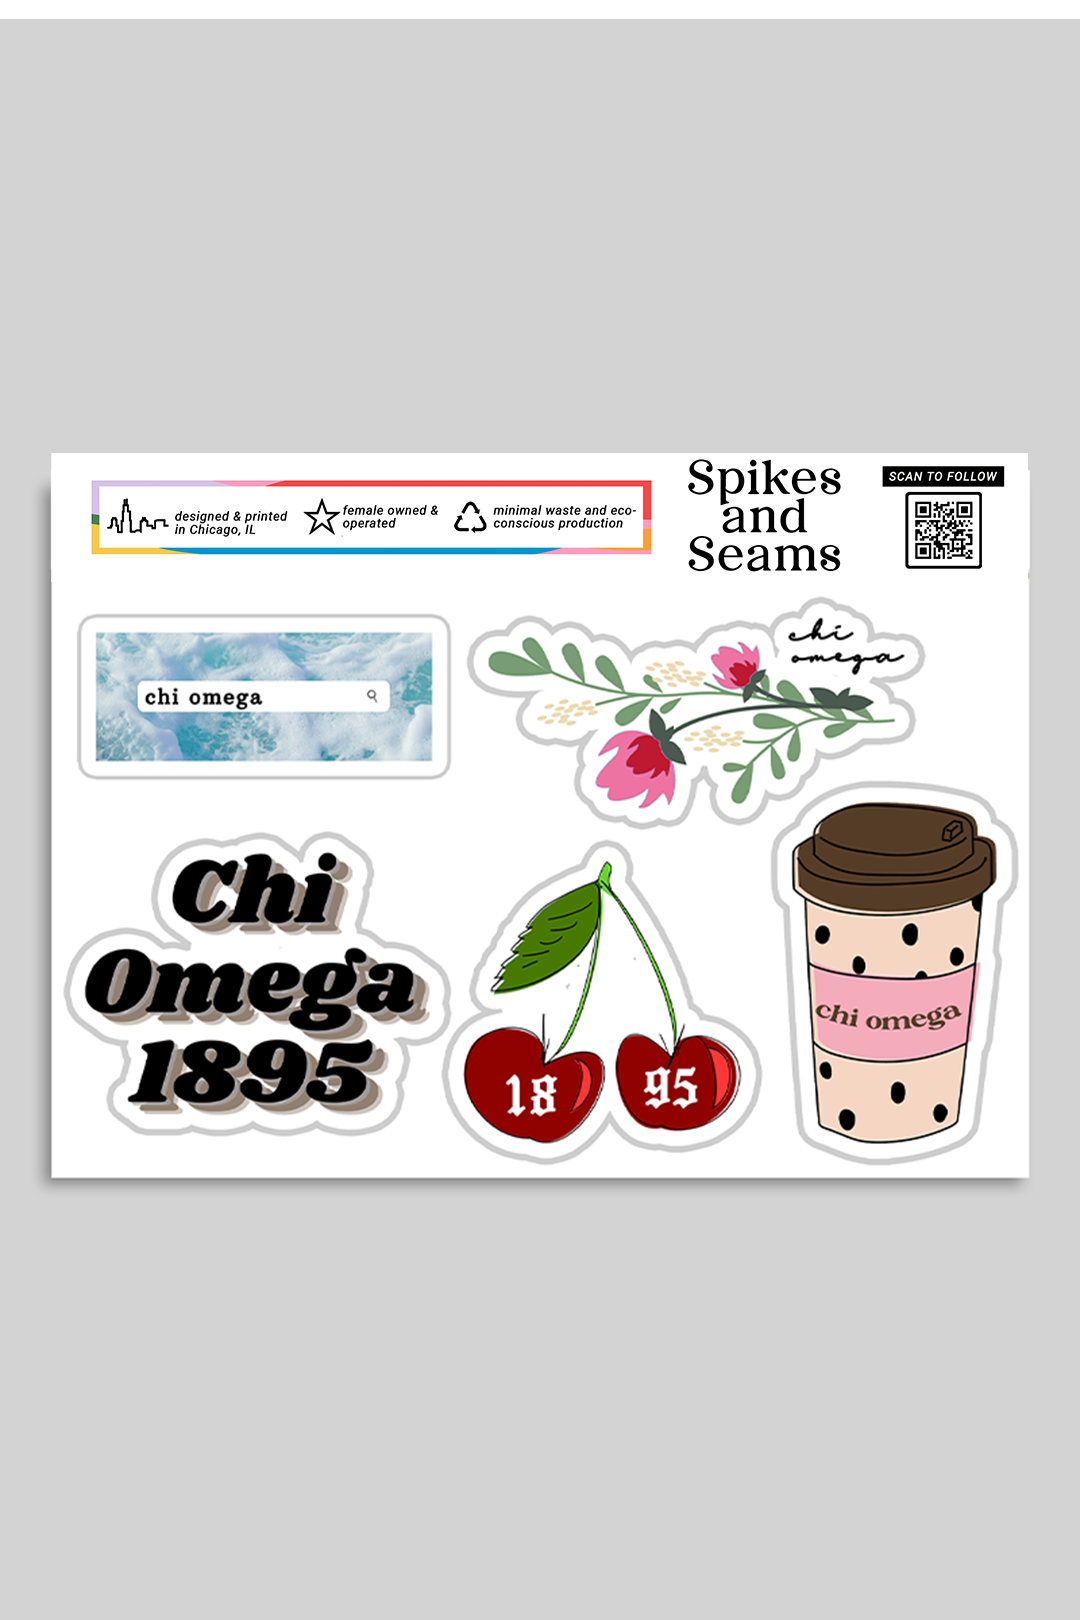 4 sheets of Hobbystickers silver numbers and symbols, peel off stickers for  scrapbooking, 4x 10x23 cm